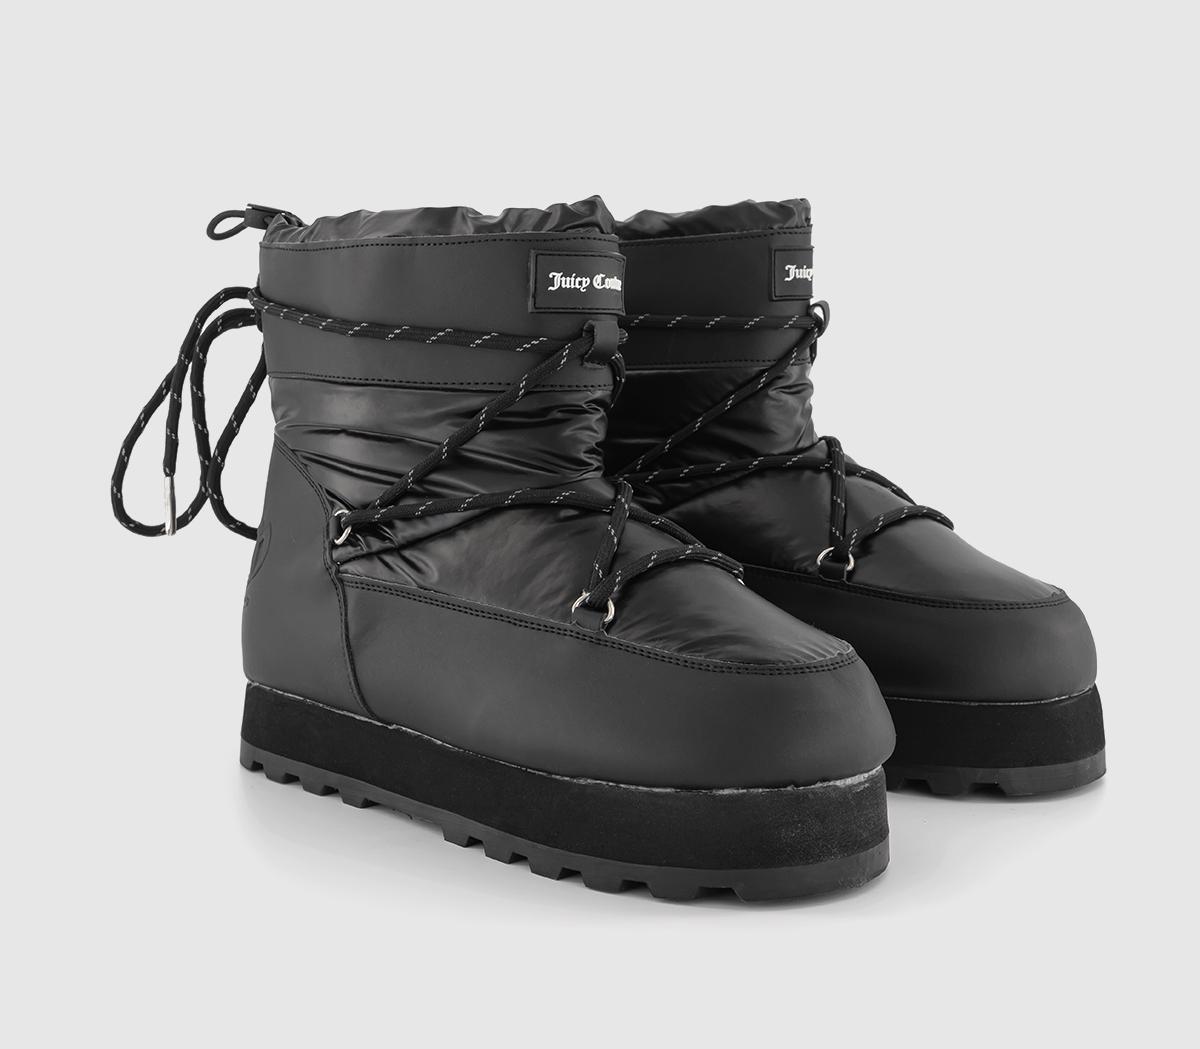 Juicy Couture Mars Boots Black - Women's Ankle Boots